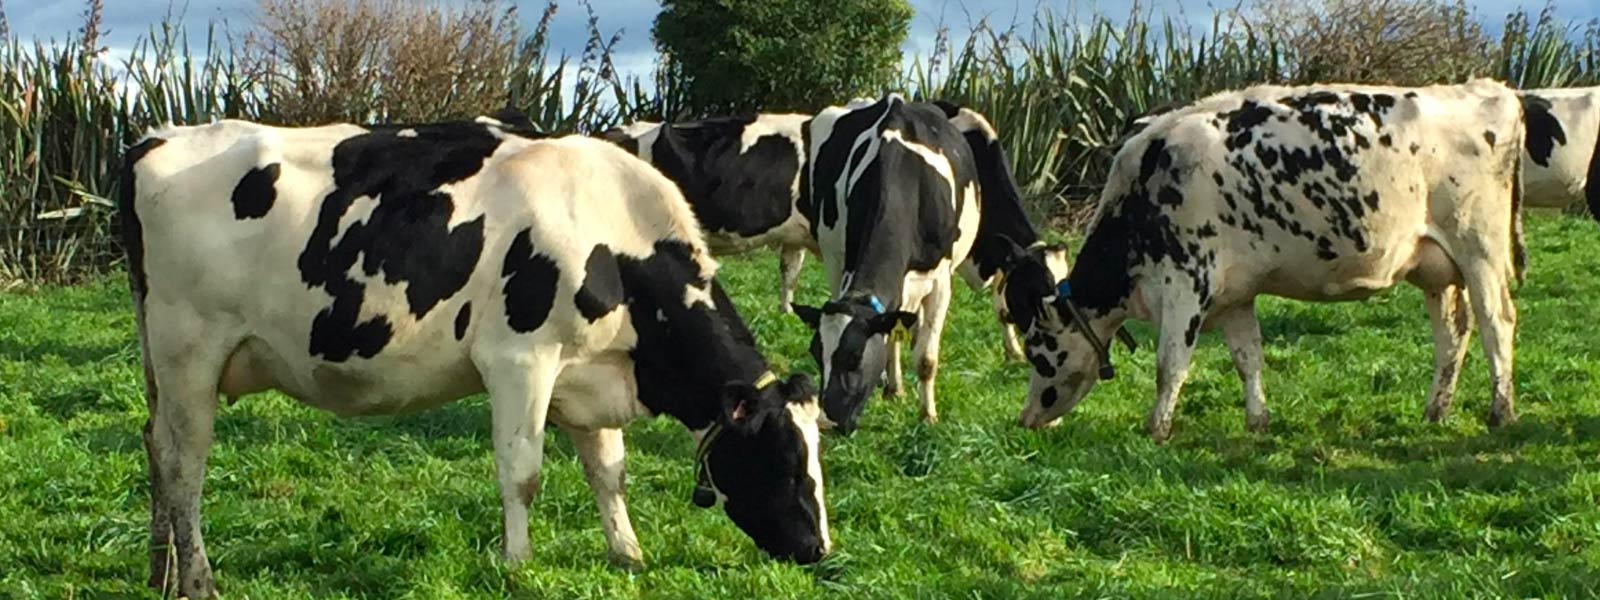 Dairy cows with collars